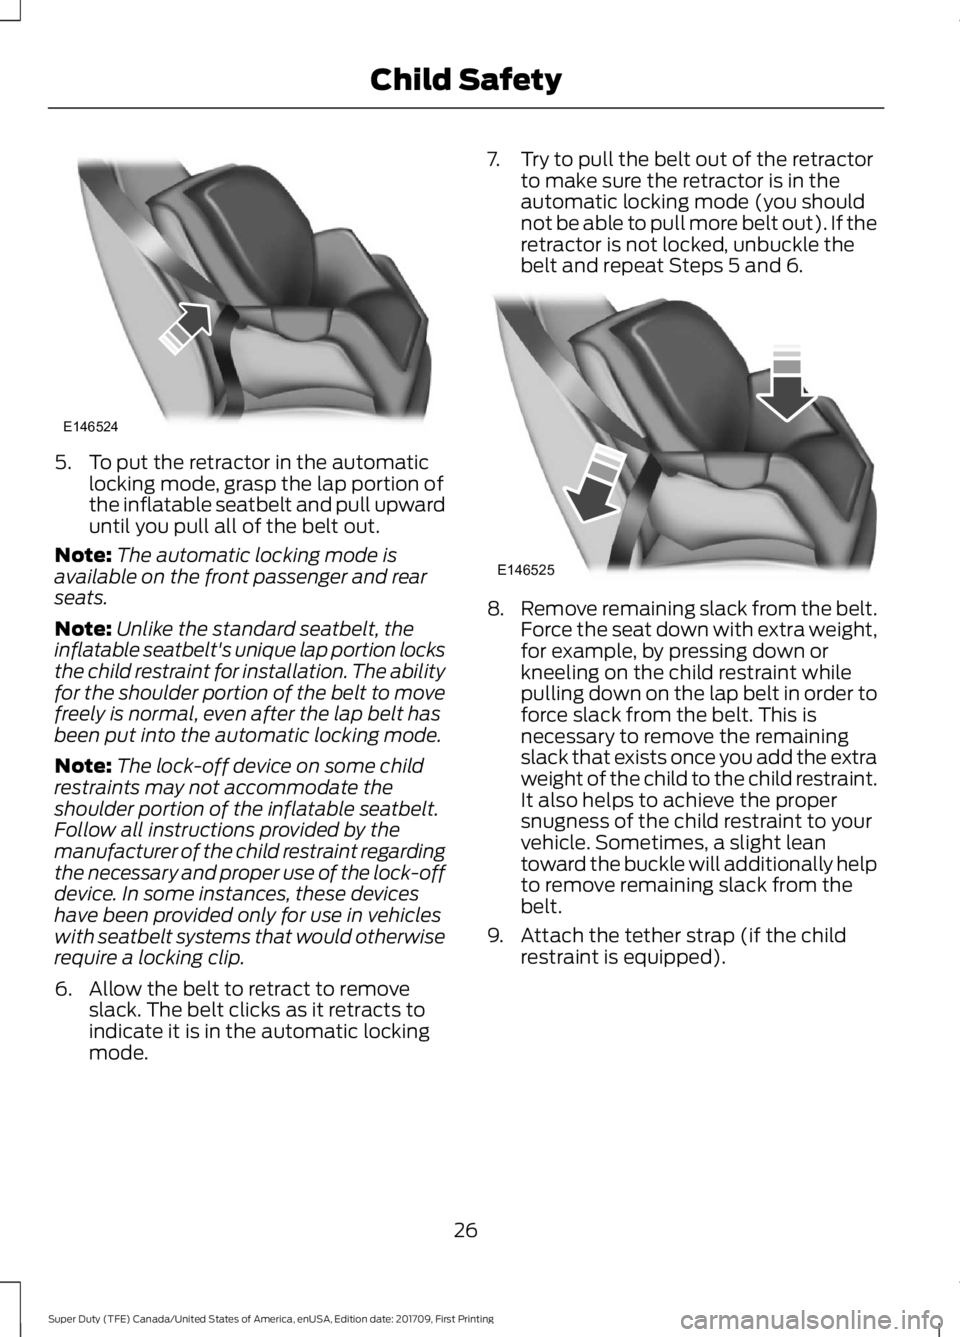 FORD F250 SUPER DUTY 2018  Owners Manual 5. To put the retractor in the automatic
locking mode, grasp the lap portion of
the inflatable seatbelt and pull upward
until you pull all of the belt out.
Note: The automatic locking mode is
availabl